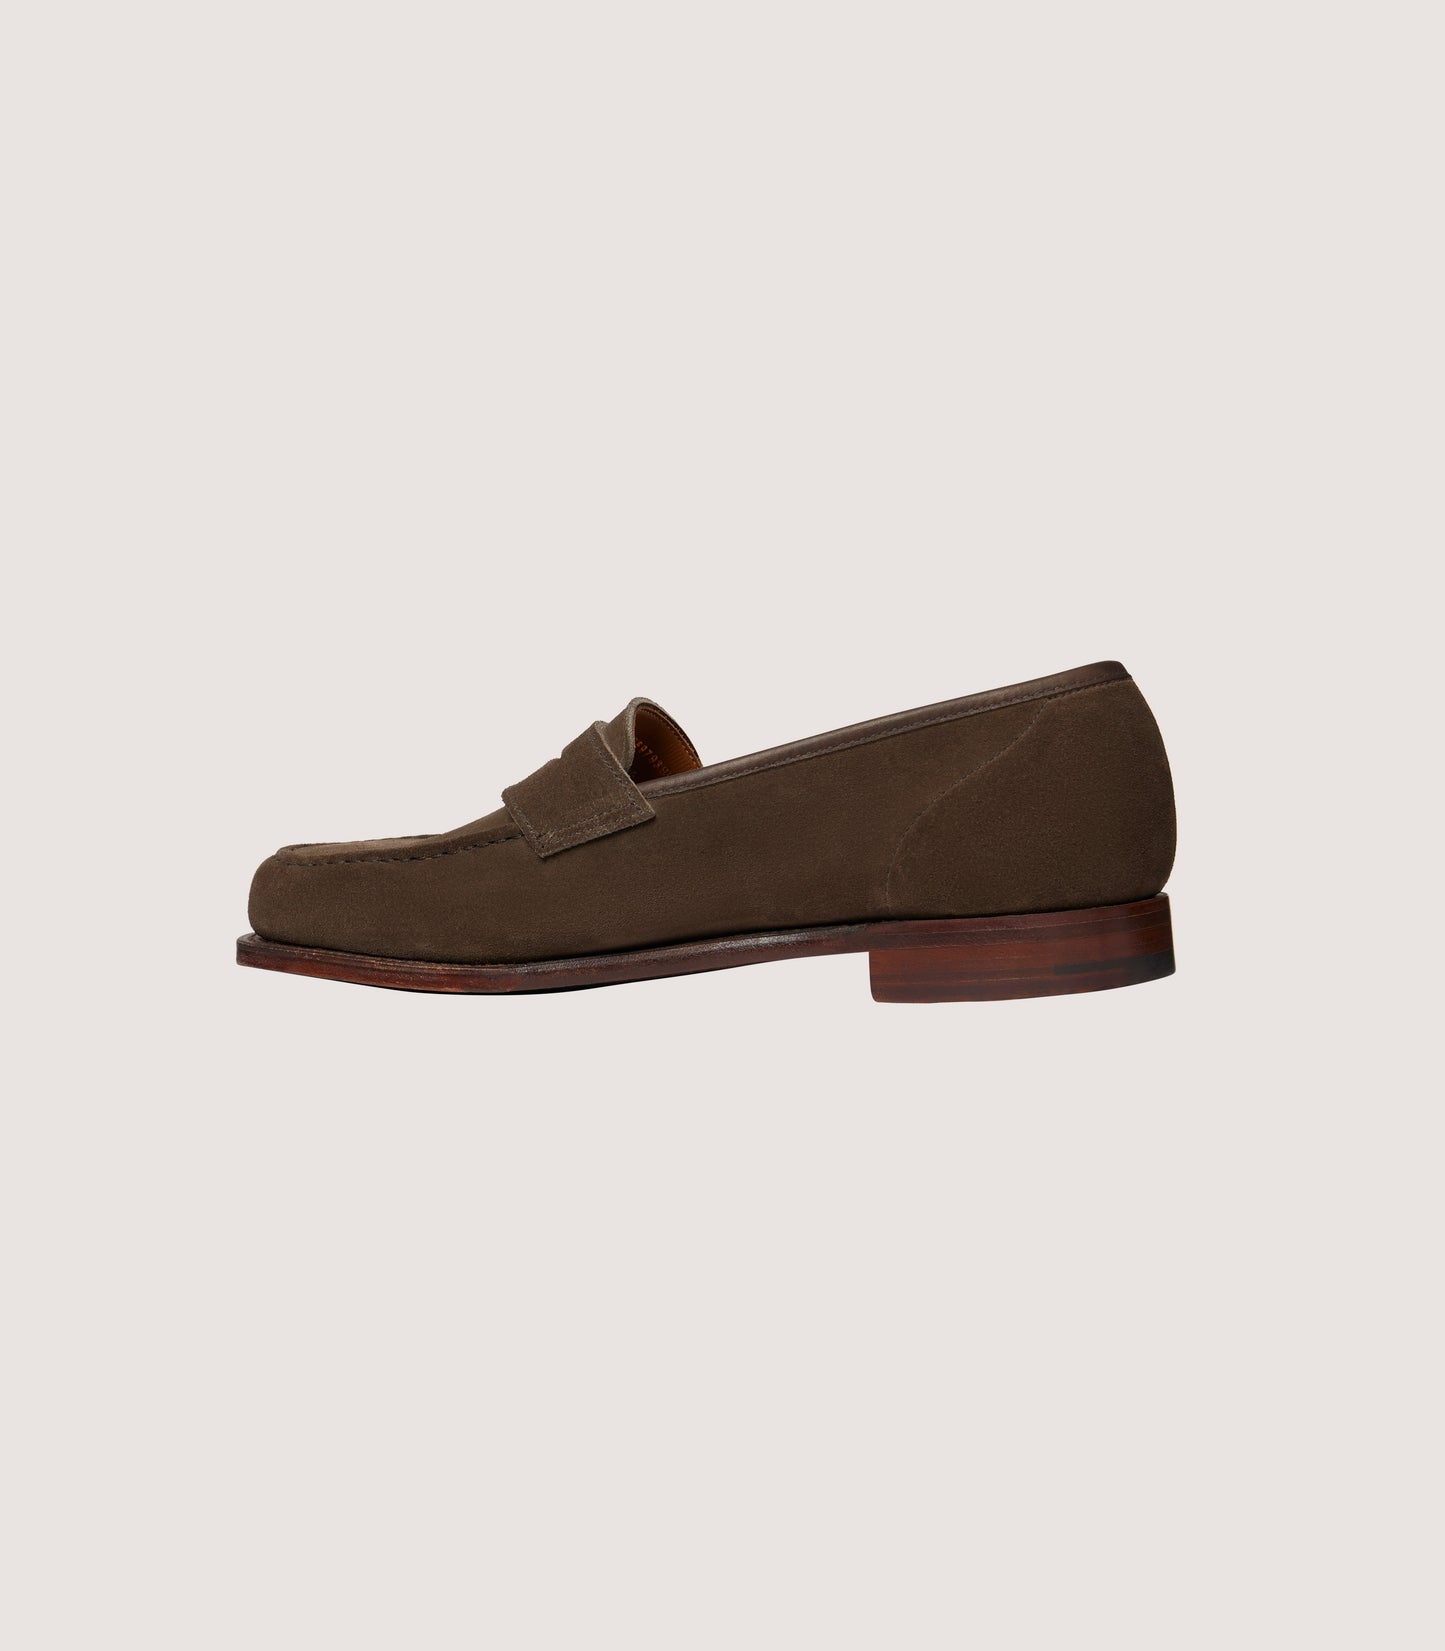 Women's Unlined Suede Penny Loafers With Superflex Leather Sole